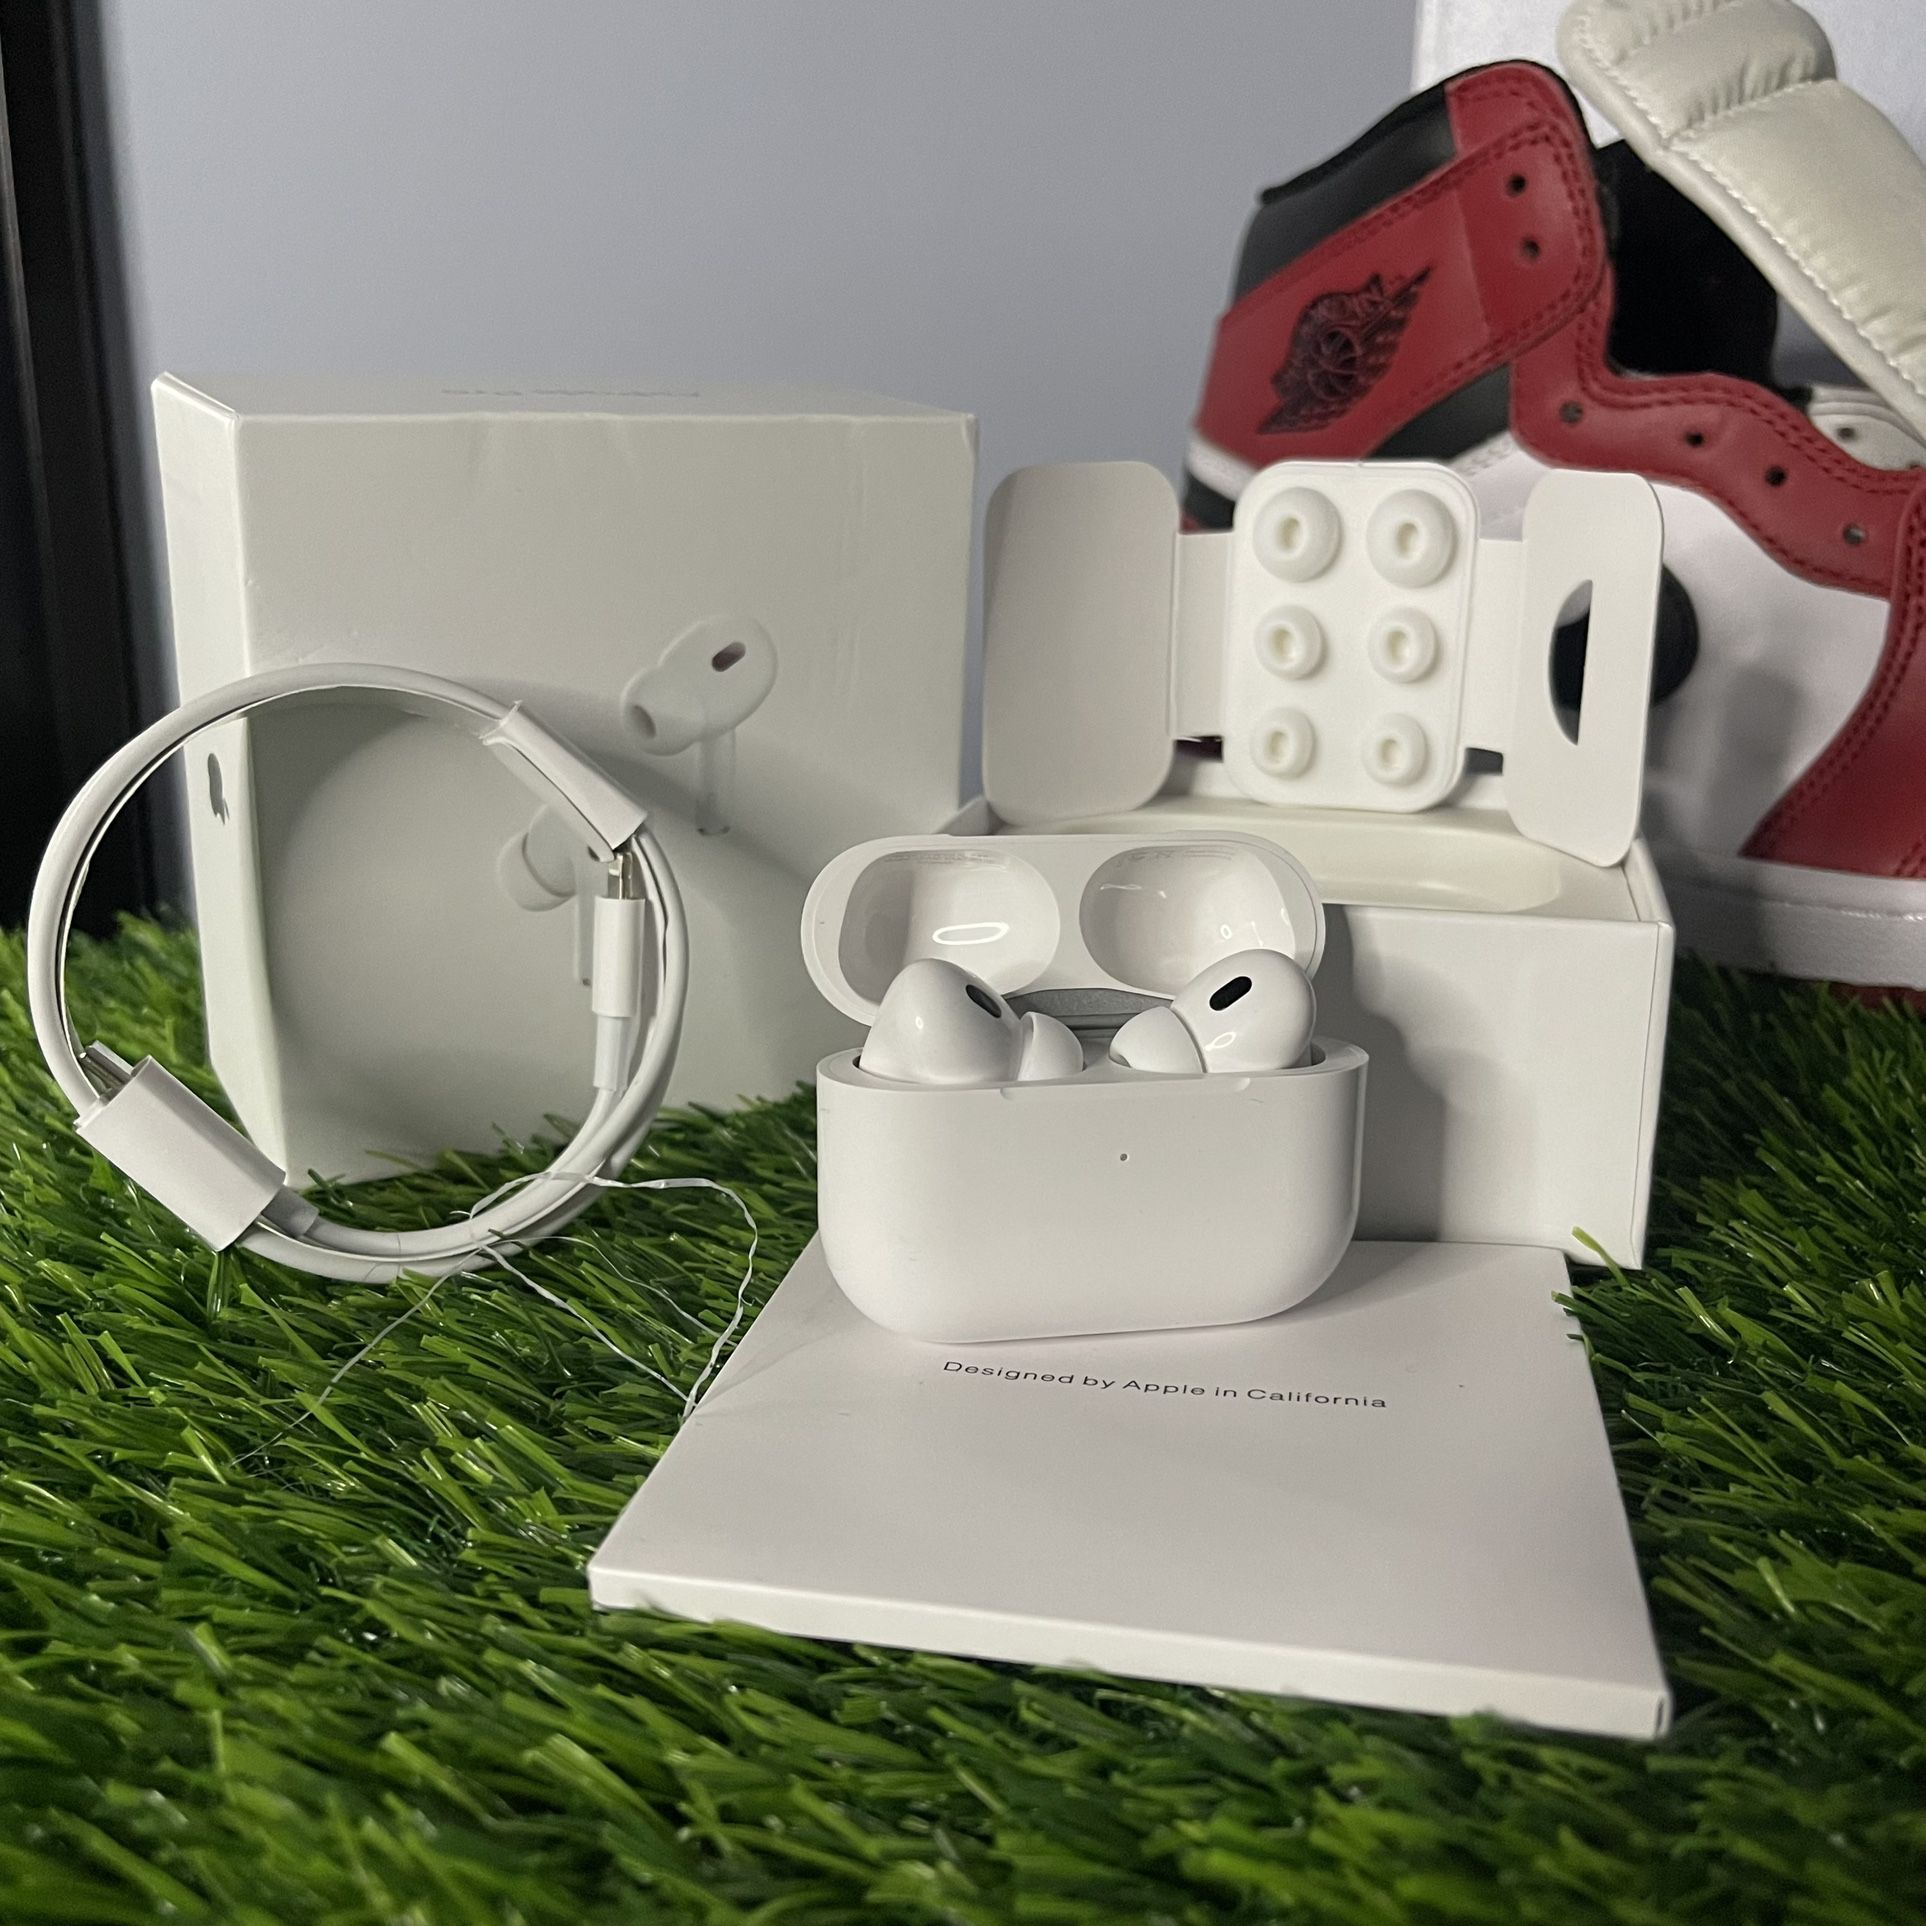 Apple AirPods Pro 2nd Generation with MagSafe Wireless Charging Case - New